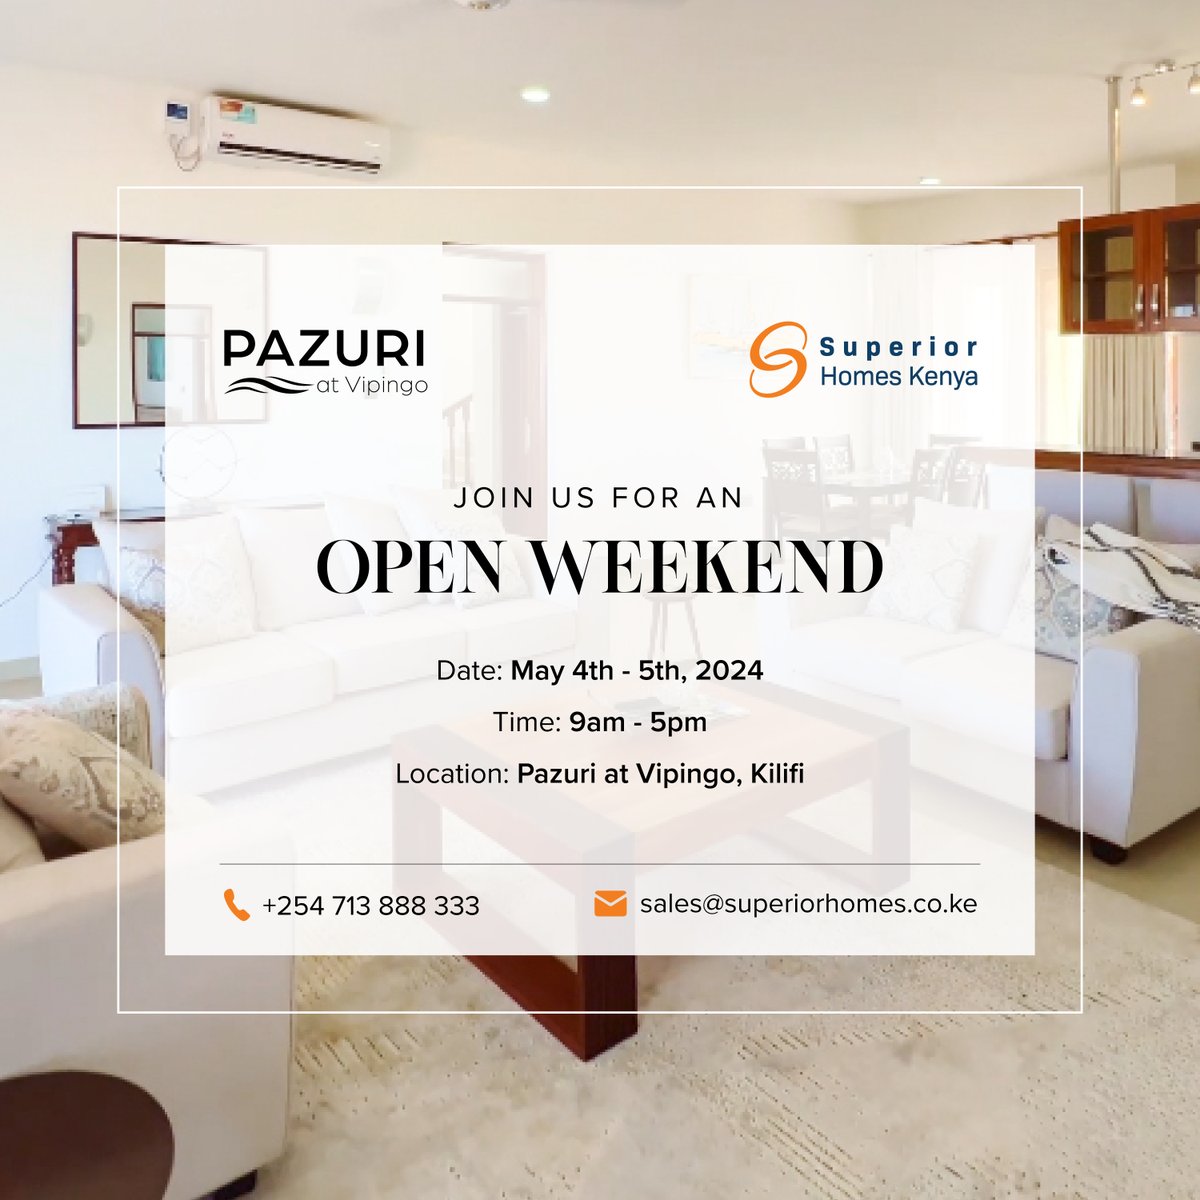 Don't miss out on the Pazuri Open Weekend, to explore exclusive investment opportunities and secure a home for your family.

Join us:

🗓 Date: May 4th - 5th, 2024
📍 Venue: Pazuri at Vipingo
🕘 Time: 9am - 5pm

#realestate #holidayhomesforsale #housesforsale #openweekend